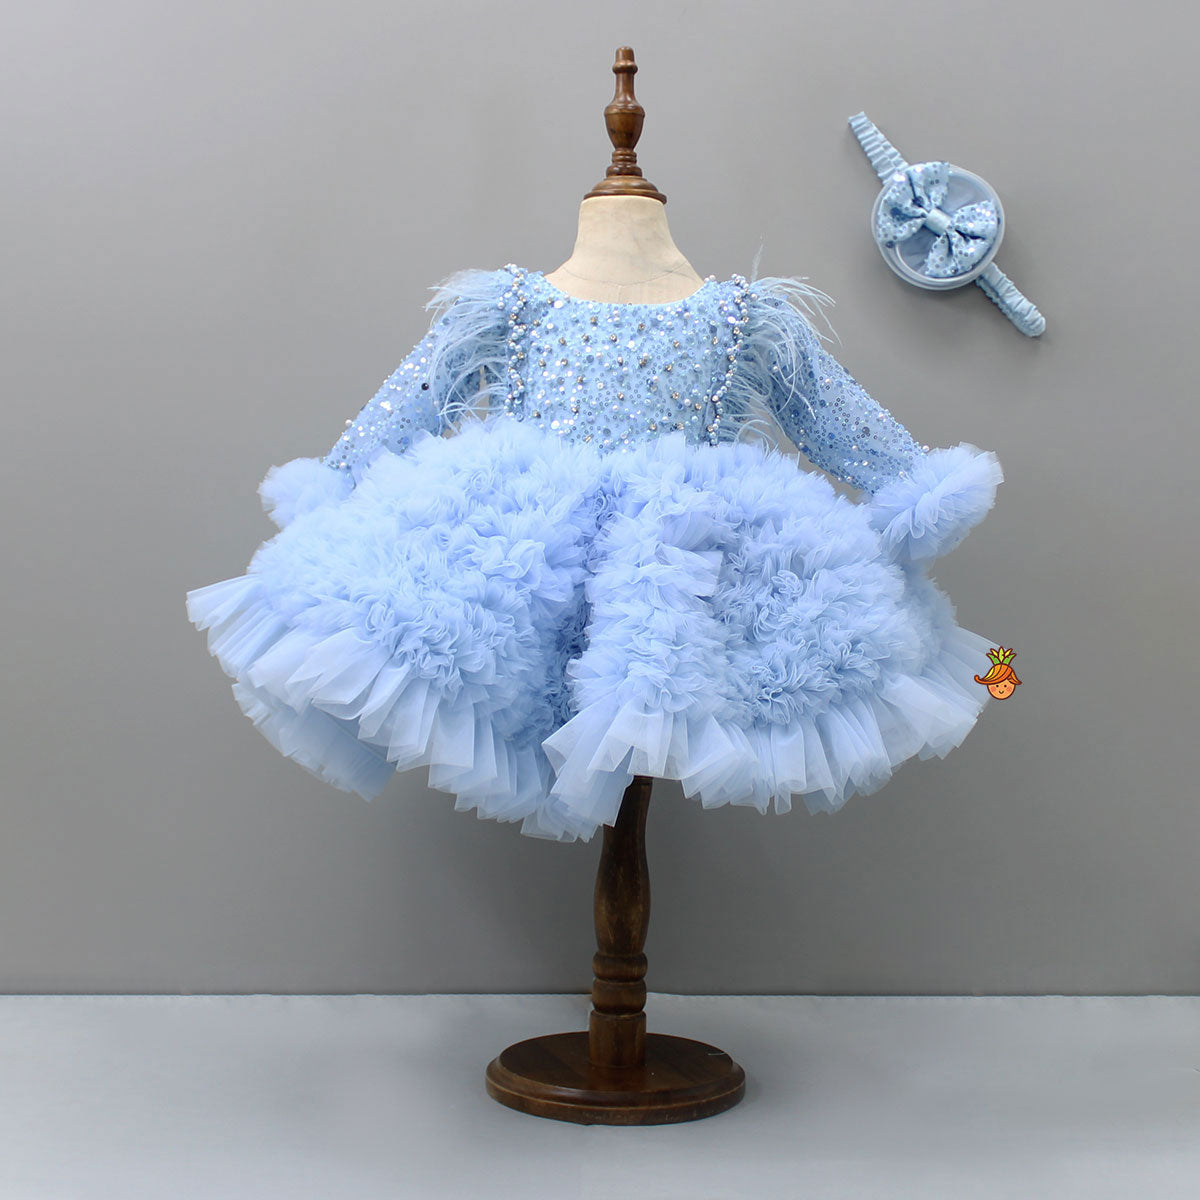 Pre Order: Sequins Embellished Ruffled Blue Dress With Matching Swirled Bowie Head Band